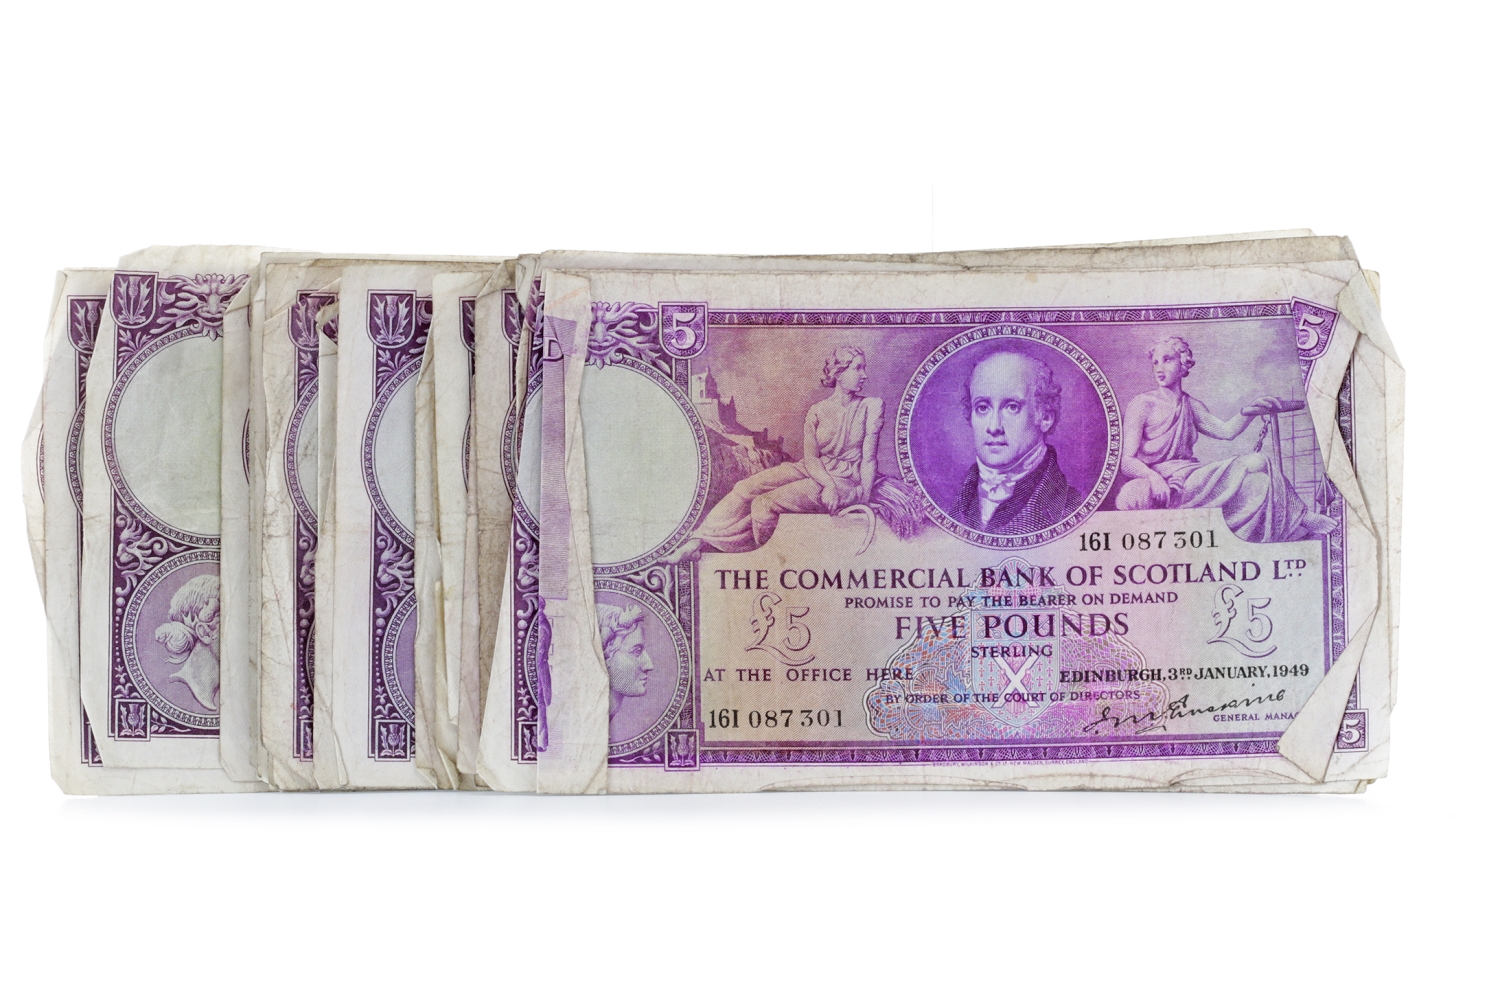 COLLECTION OF THE COMMERCIAL BANK OF SCOTLAND LTD £5 FIVE POUNDS NOTES all dating to the 1950s,